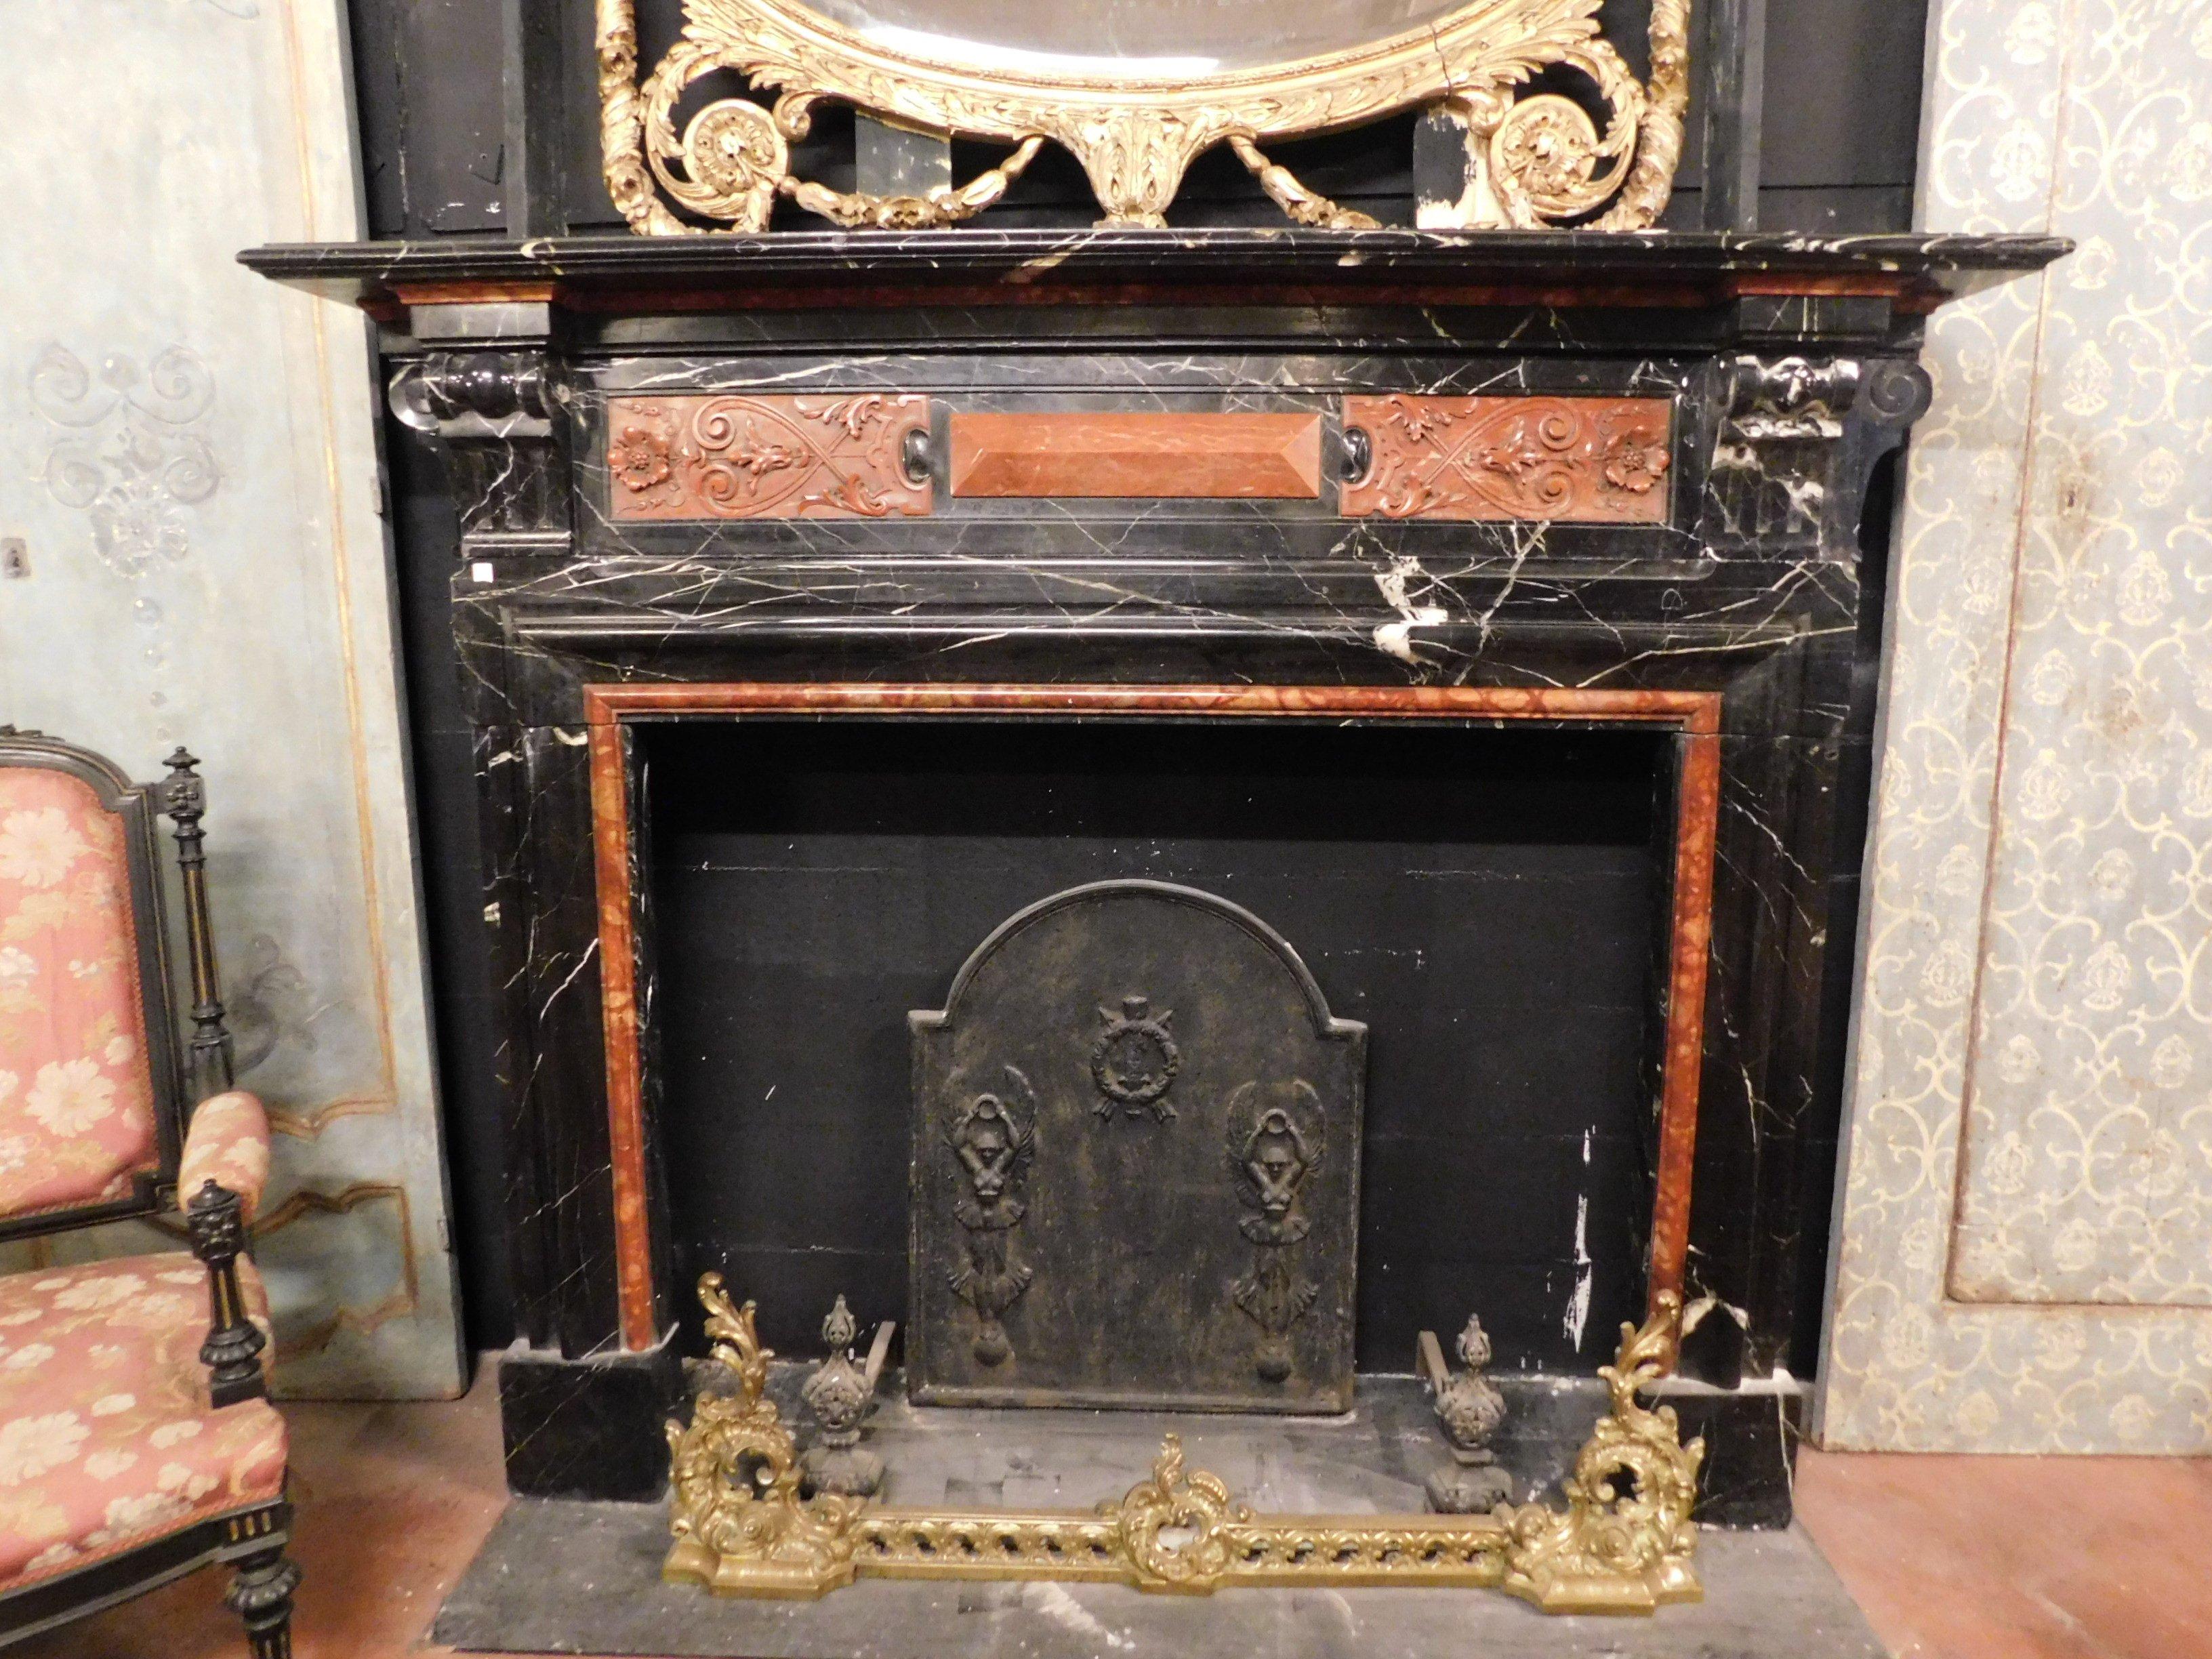 Antique and very precious fireplace in black marble with white veins, inlaid with red marble, hand carved and inlaid in the mid-19th century, by a Belgian craftsman artist, for a historic Belgian building.
Great luxury and elegance, black gives the